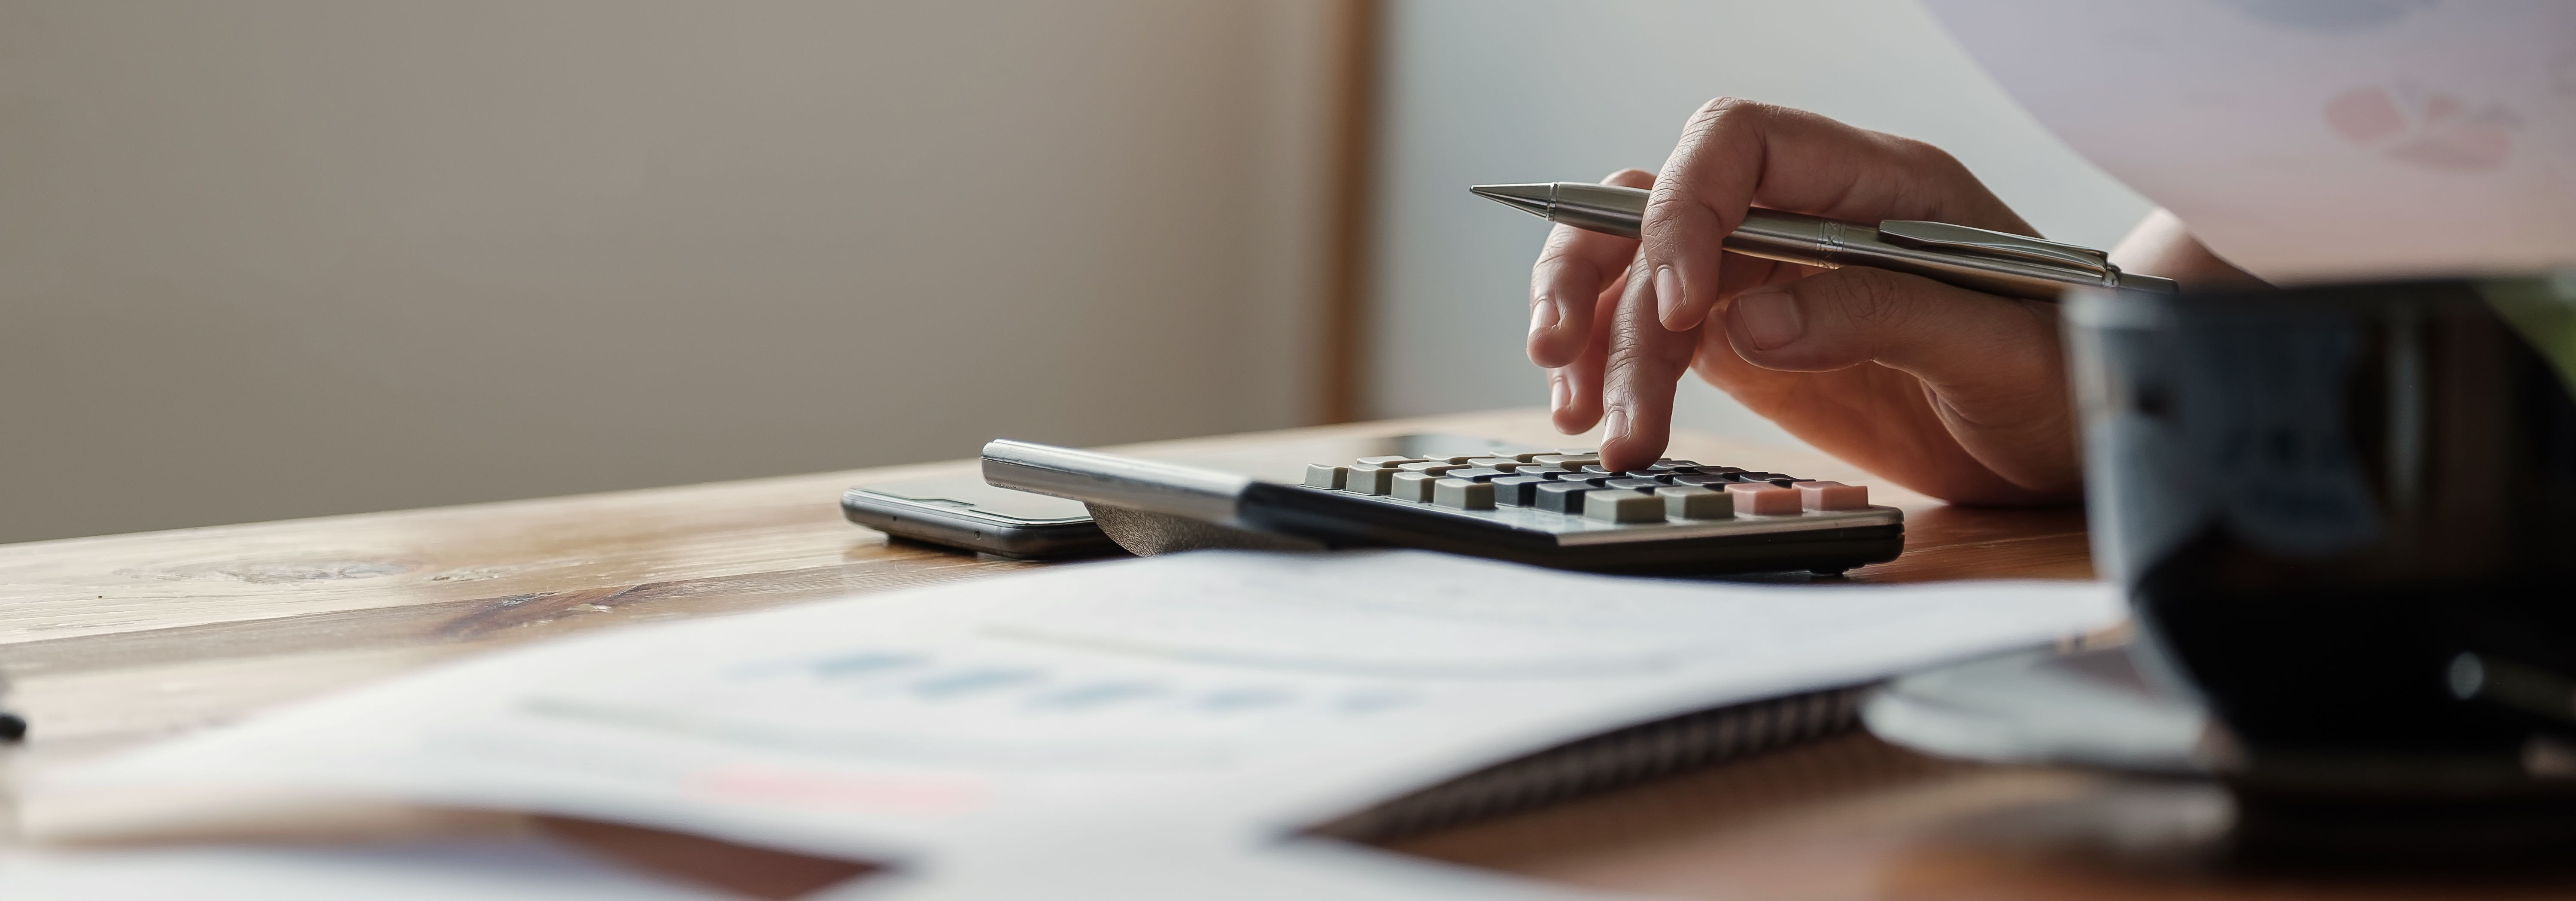 At Arusoo Finants OÜ, we understand that managing your company's finances can be complex and time-consuming. That's why we offer a comprehensive suite of accoun